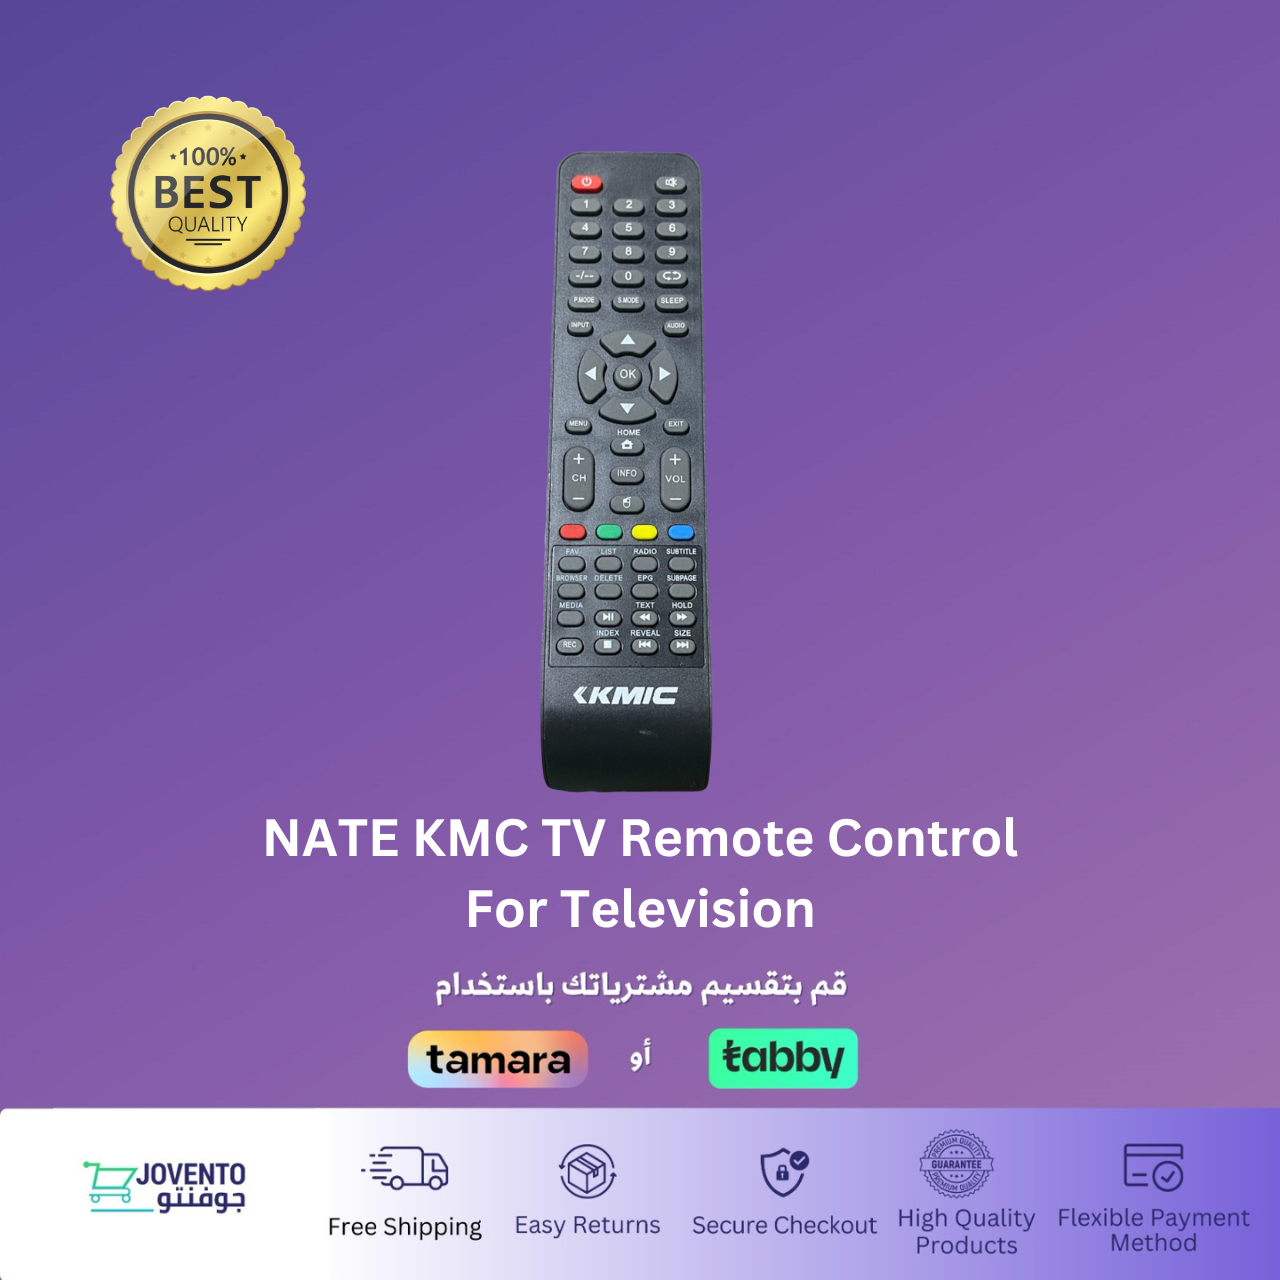 NATE KMC TV Remote Control For Television